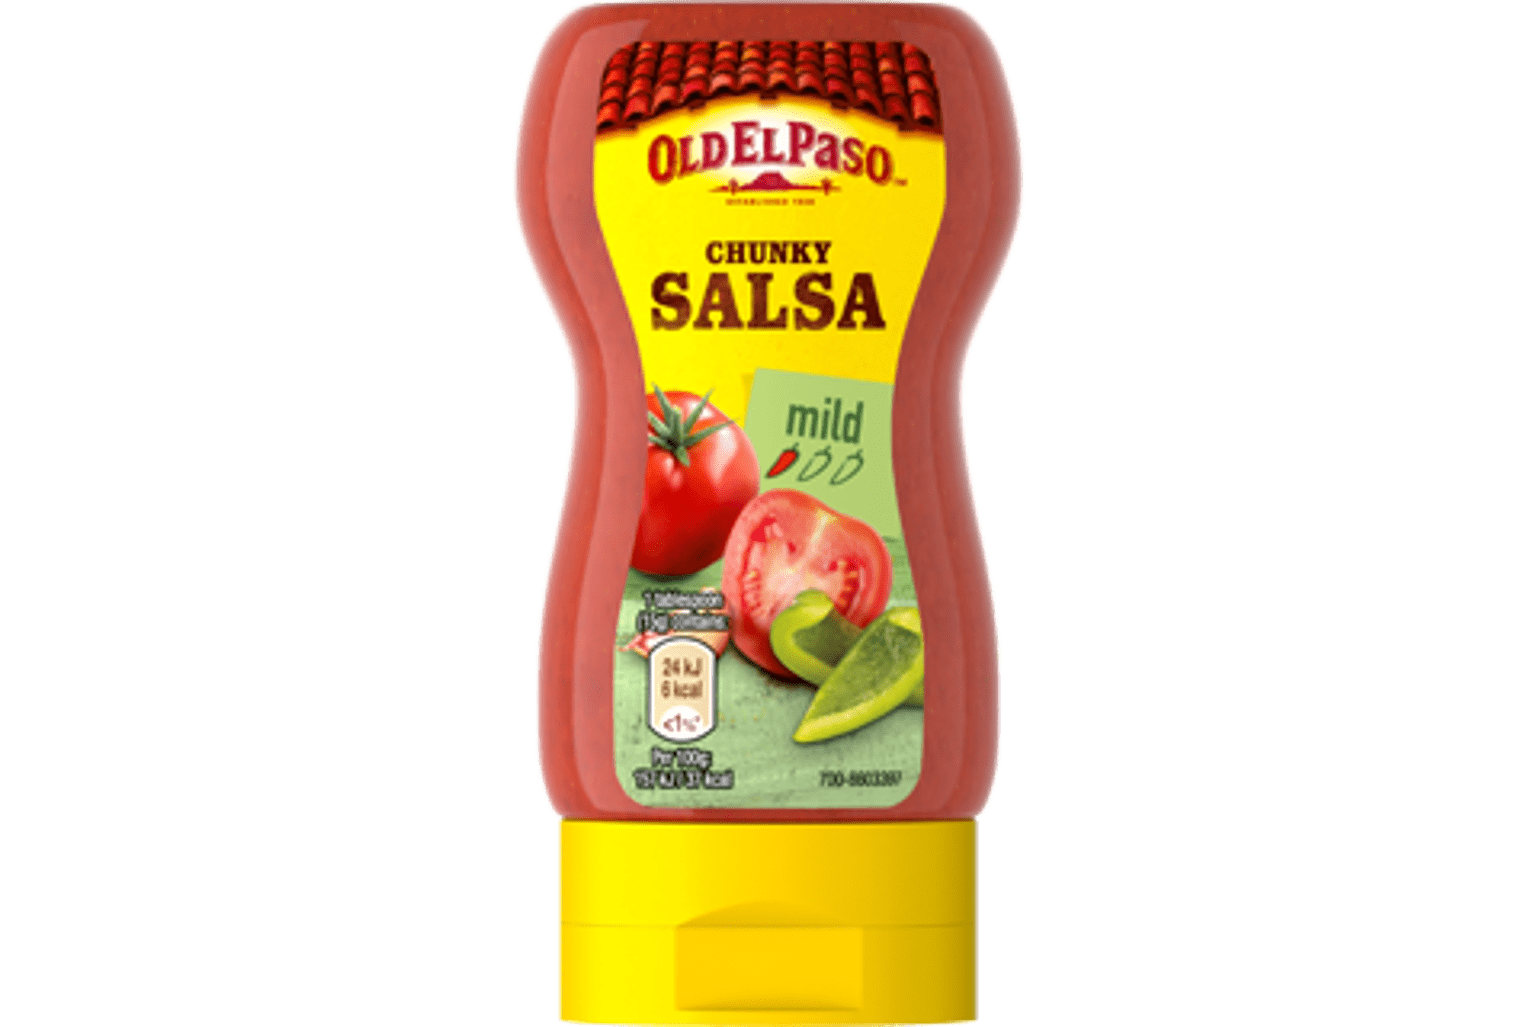 Squeezy bottle of Old El Paso's chunky salsa